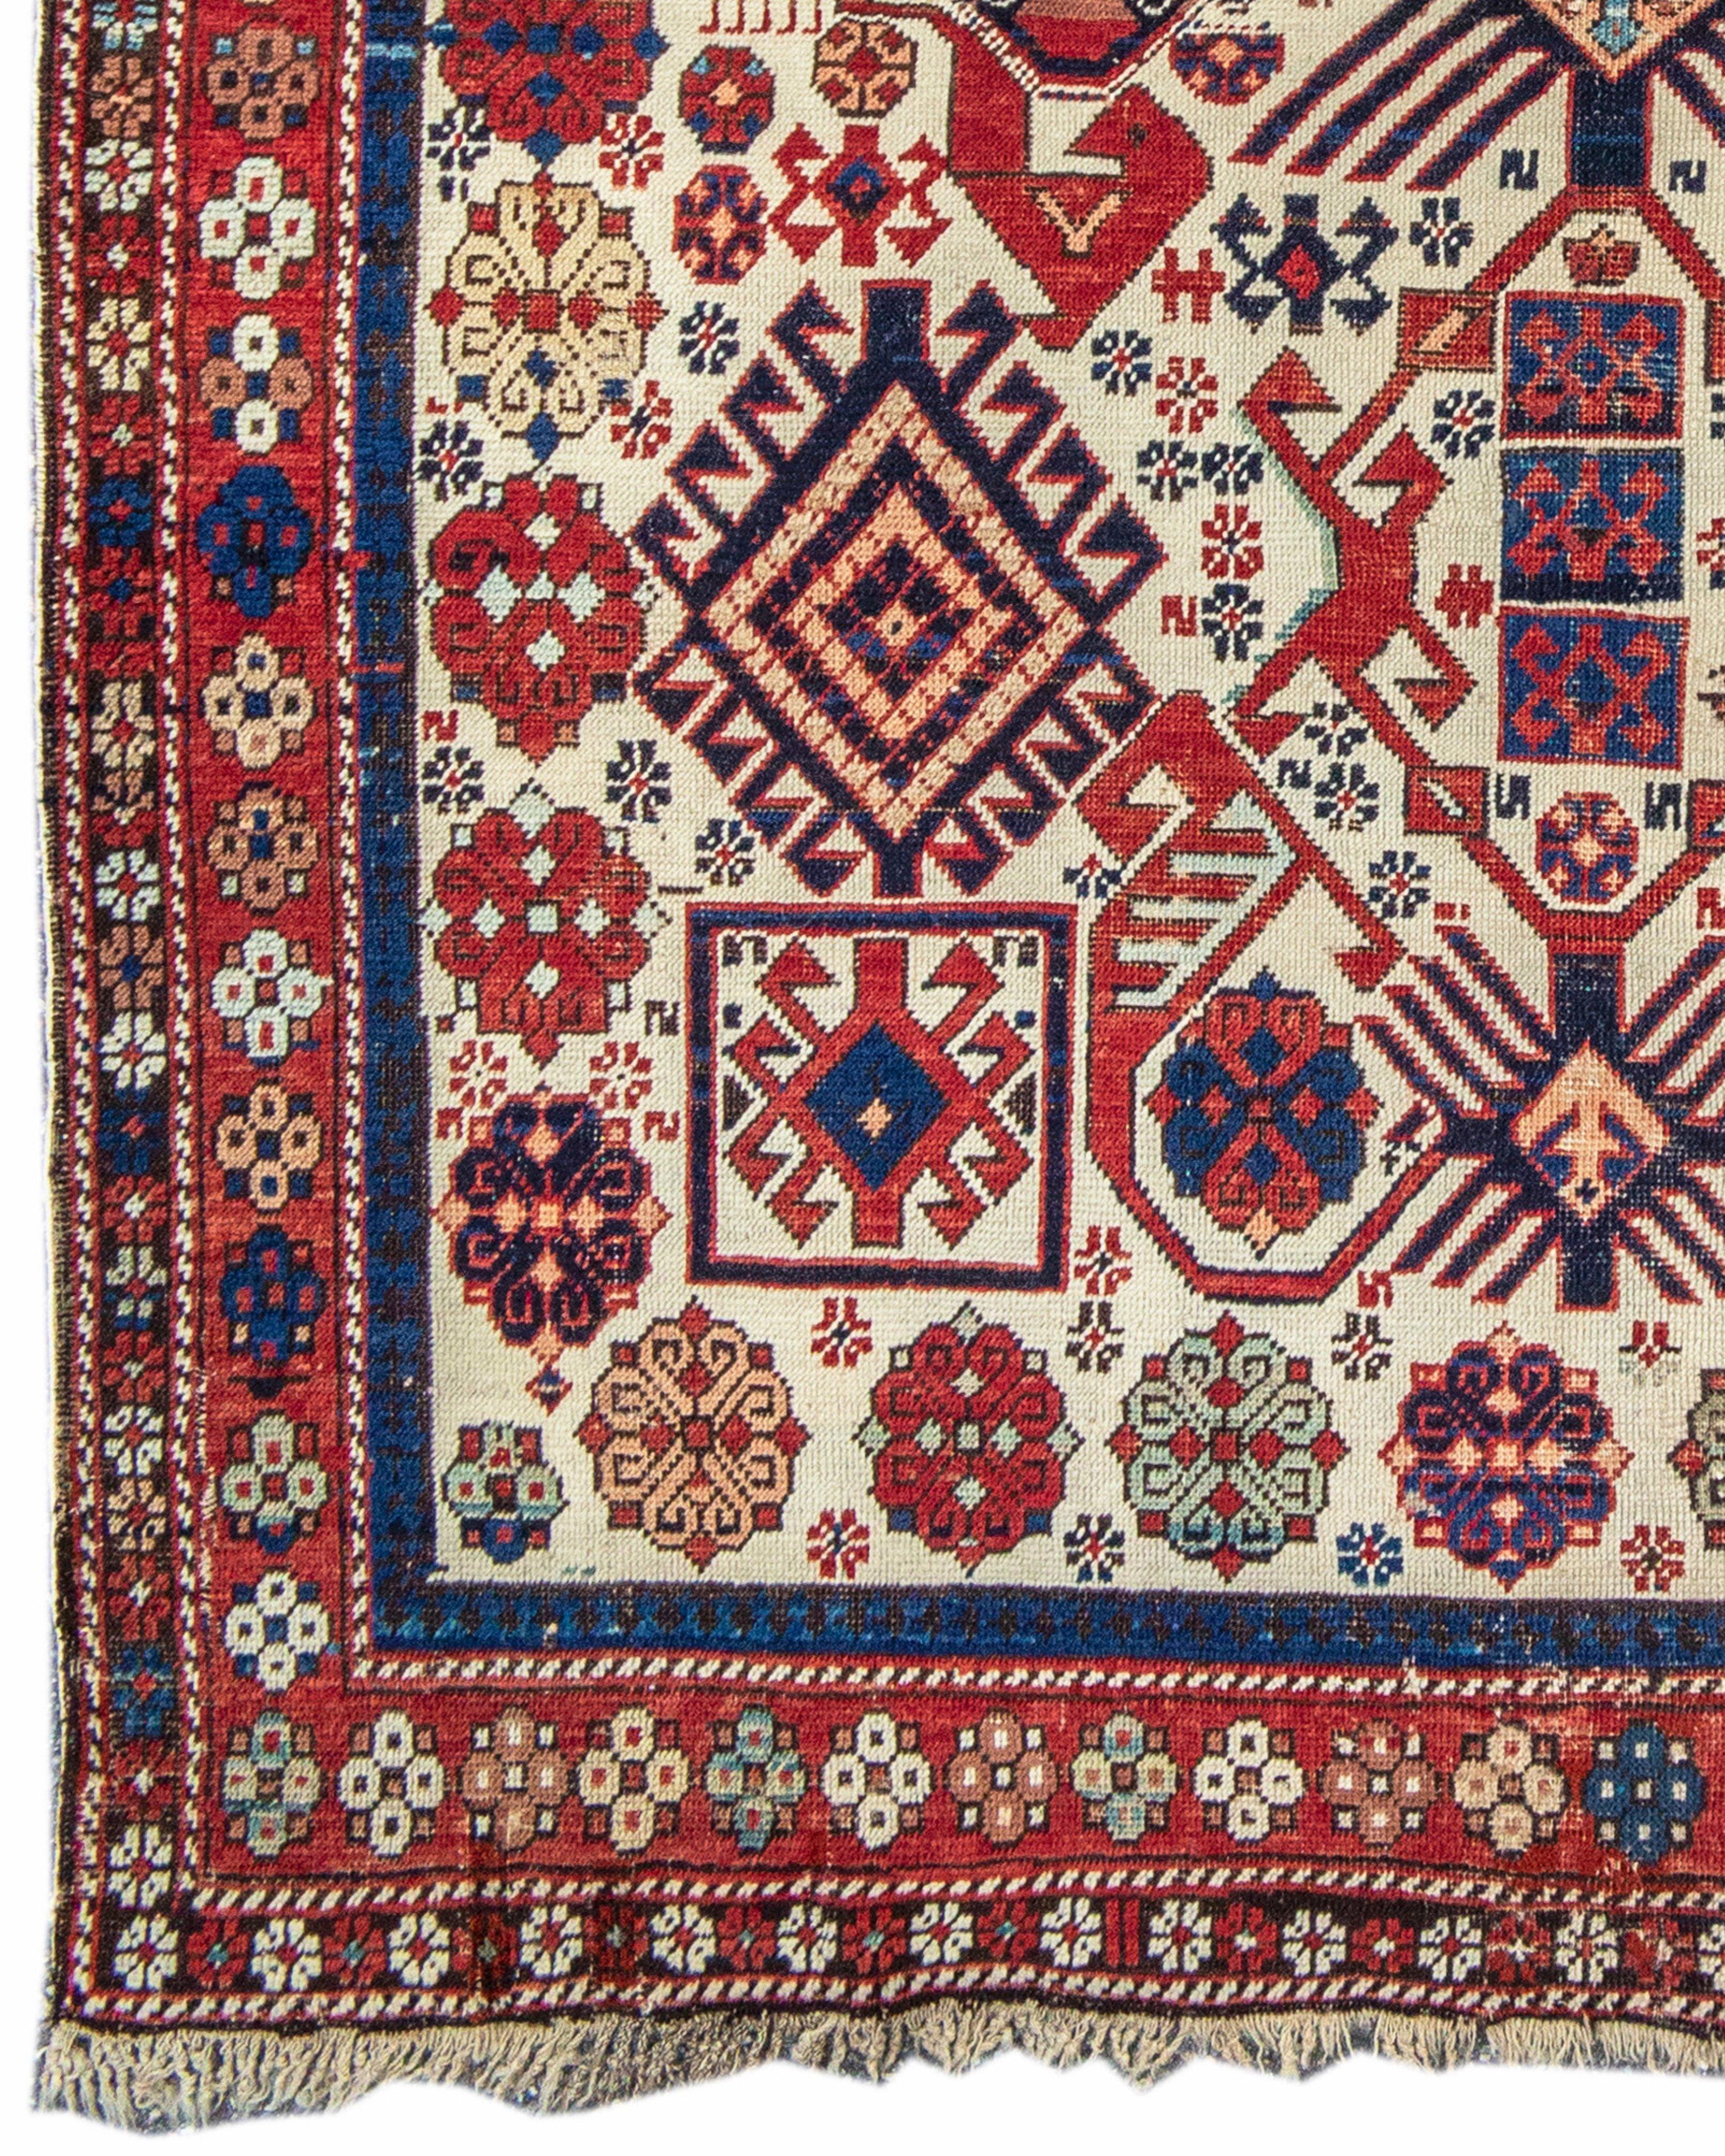 Hand-Woven Antique Persian Shirvan Rug, Late 19th Century